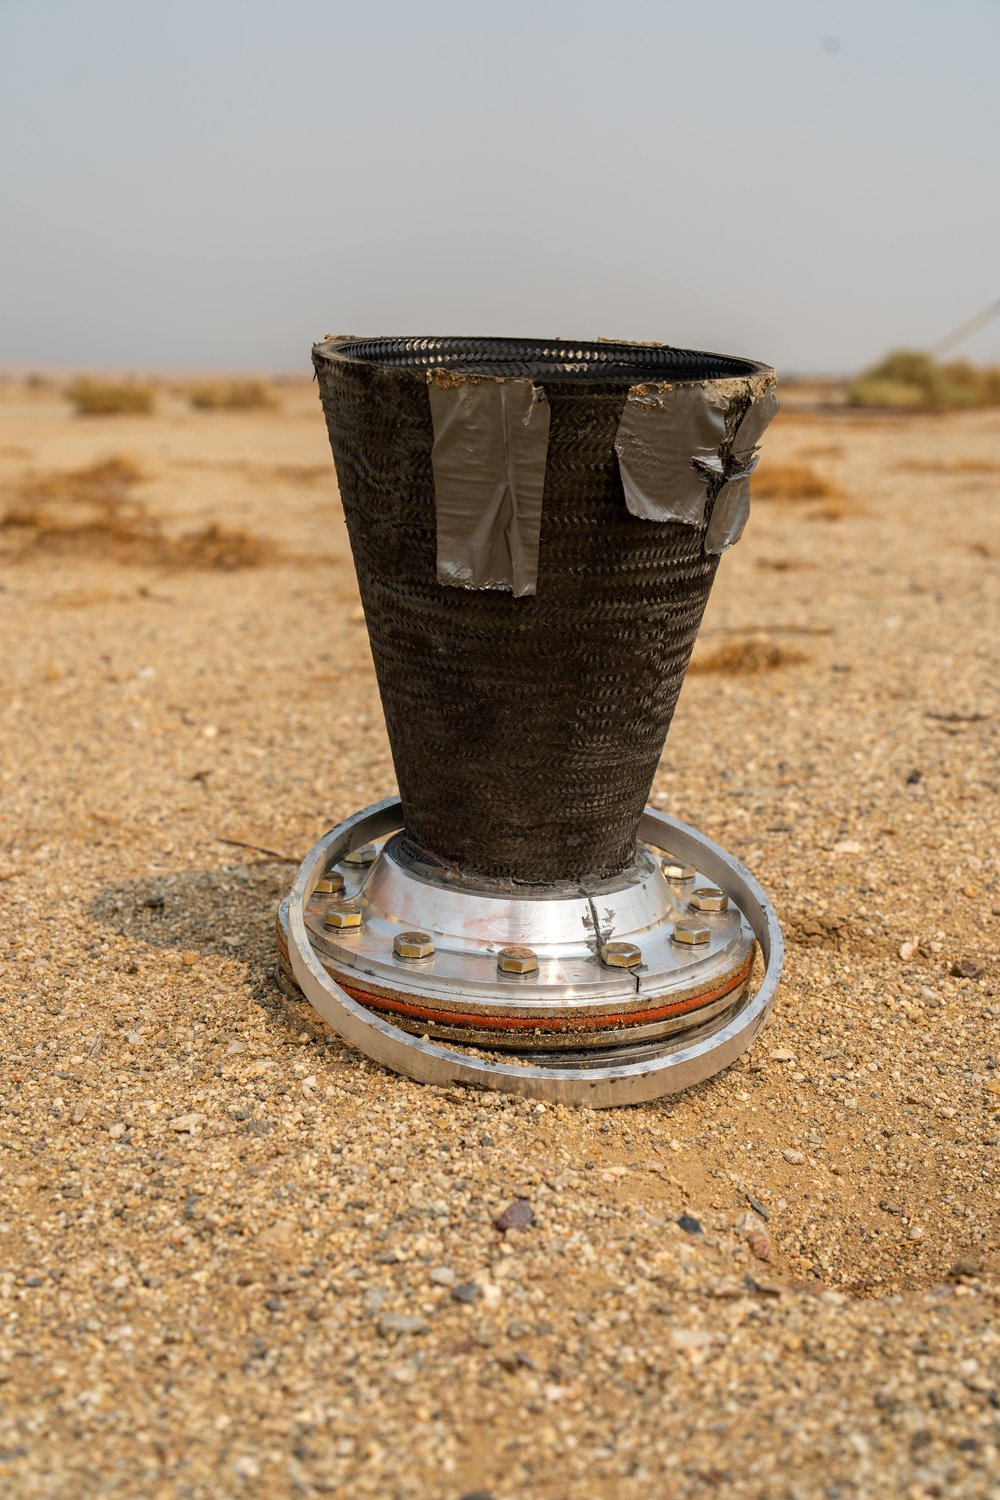 ESII nozzle as it was found aft of the test stand following the anomaly.